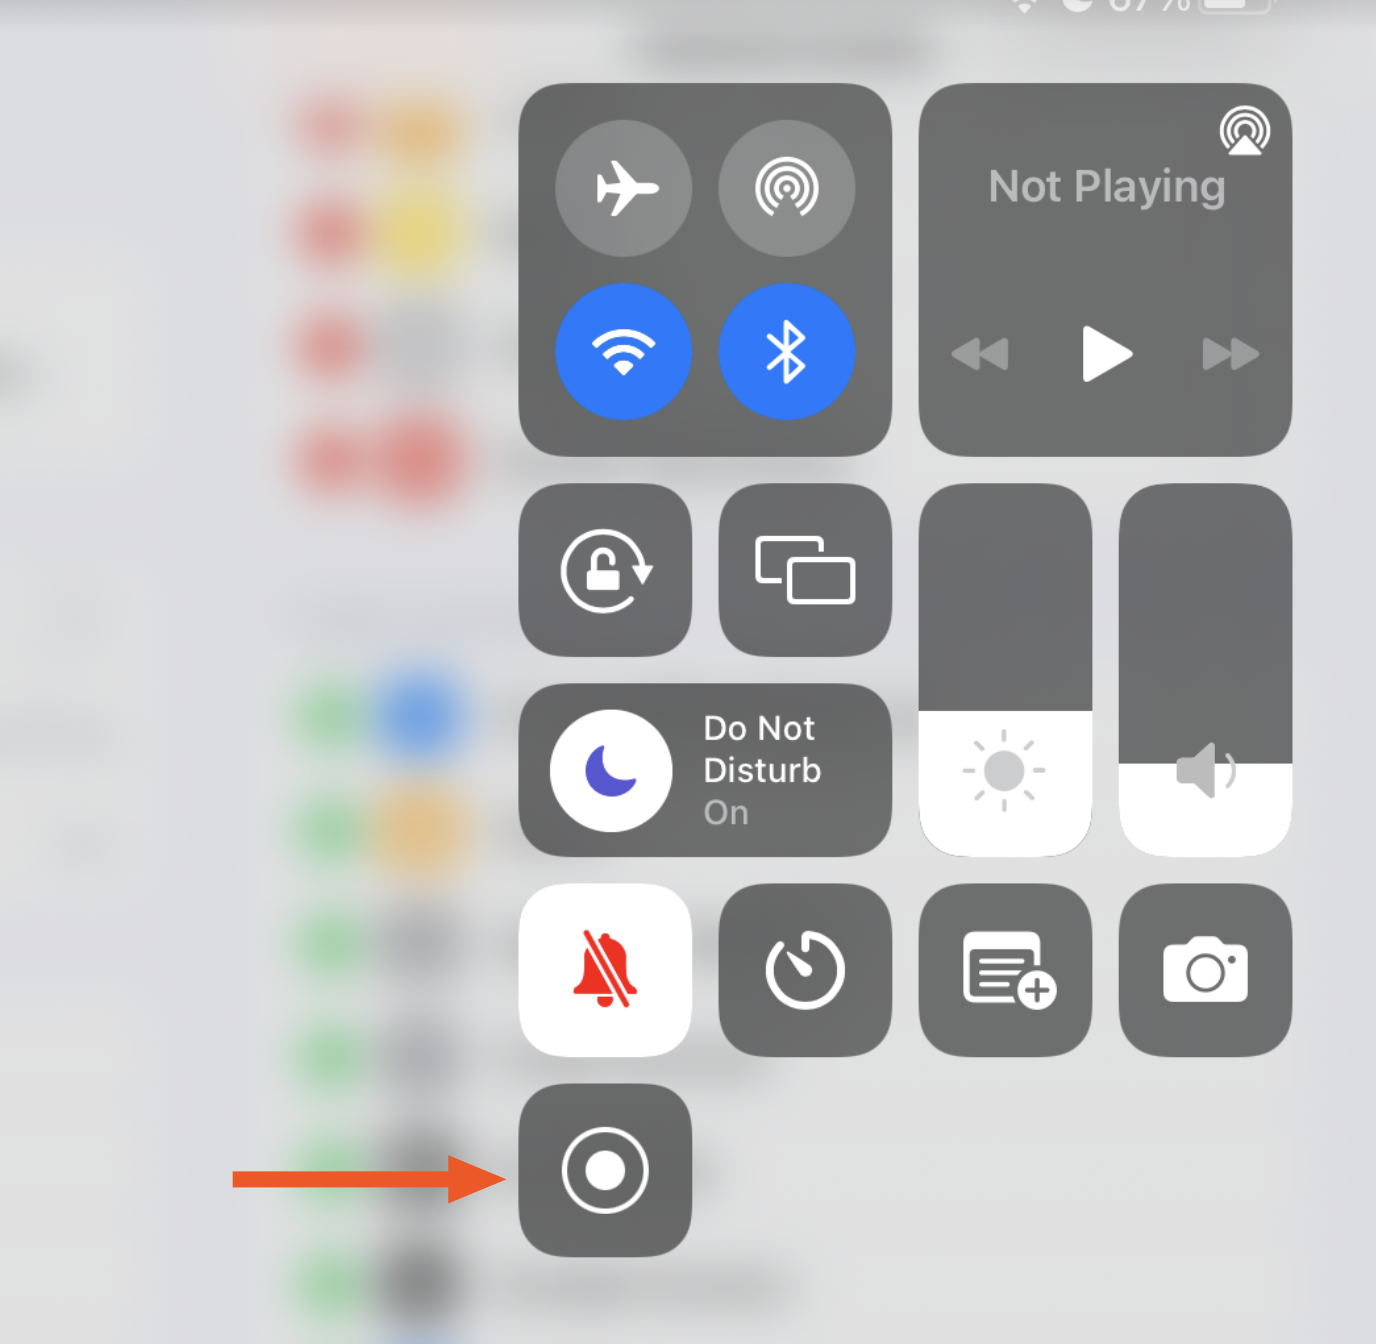 Settings > Control Center on iPad” class=”exux6p41 e1wfwsb40 css-zwnd1r-MaxWidthImage-RichImageComponentStyled-Image egm5f9k0″ src=”https://images.ctfassets.net/lzny33ho1g45/5r1DNLHijOfgBPySTIRNvr/aecc1339047fe23d203837ffc713525c/how-to-record-your-screen-07-ios-screen-recording.png?w=1400″/> 3. Swipe down into your Control Center at any point, and tap the button to start record .<img decoding=